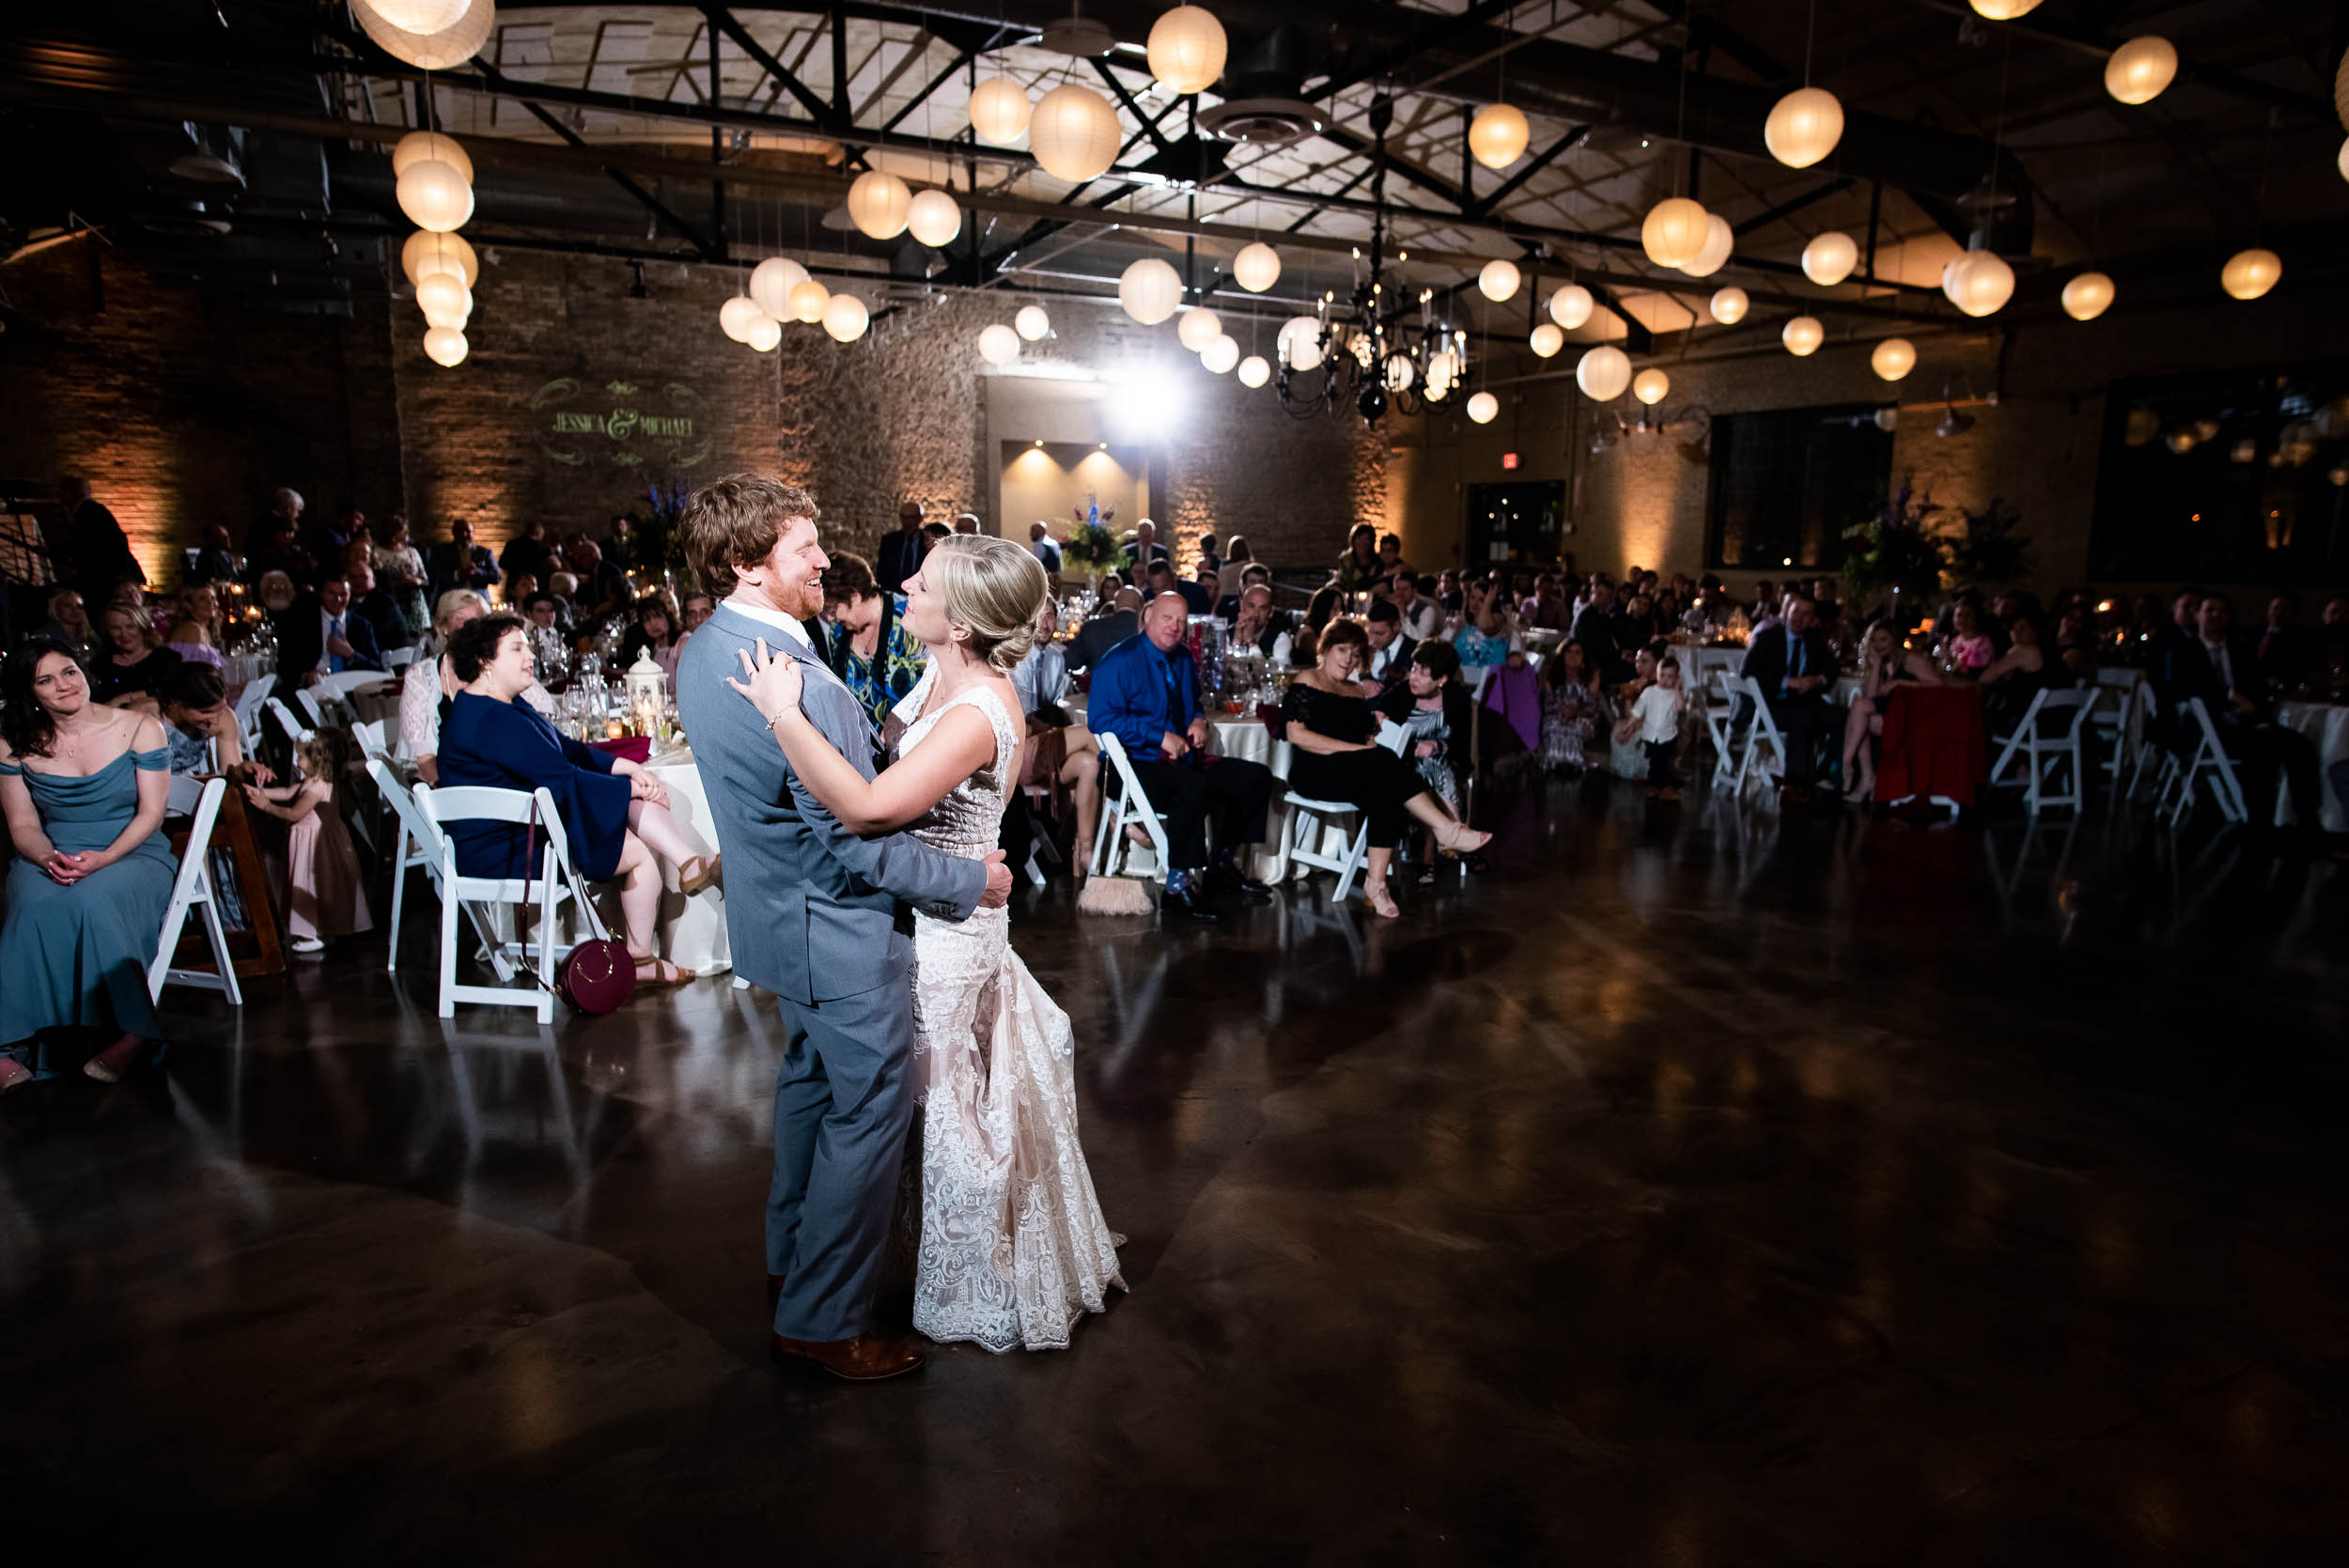 Wedding dancing: Modern industrial Chicago wedding inside Prairie Street Brewhouse captured by J. Brown Photography. Find more wedding ideas at jbrownphotography.com!